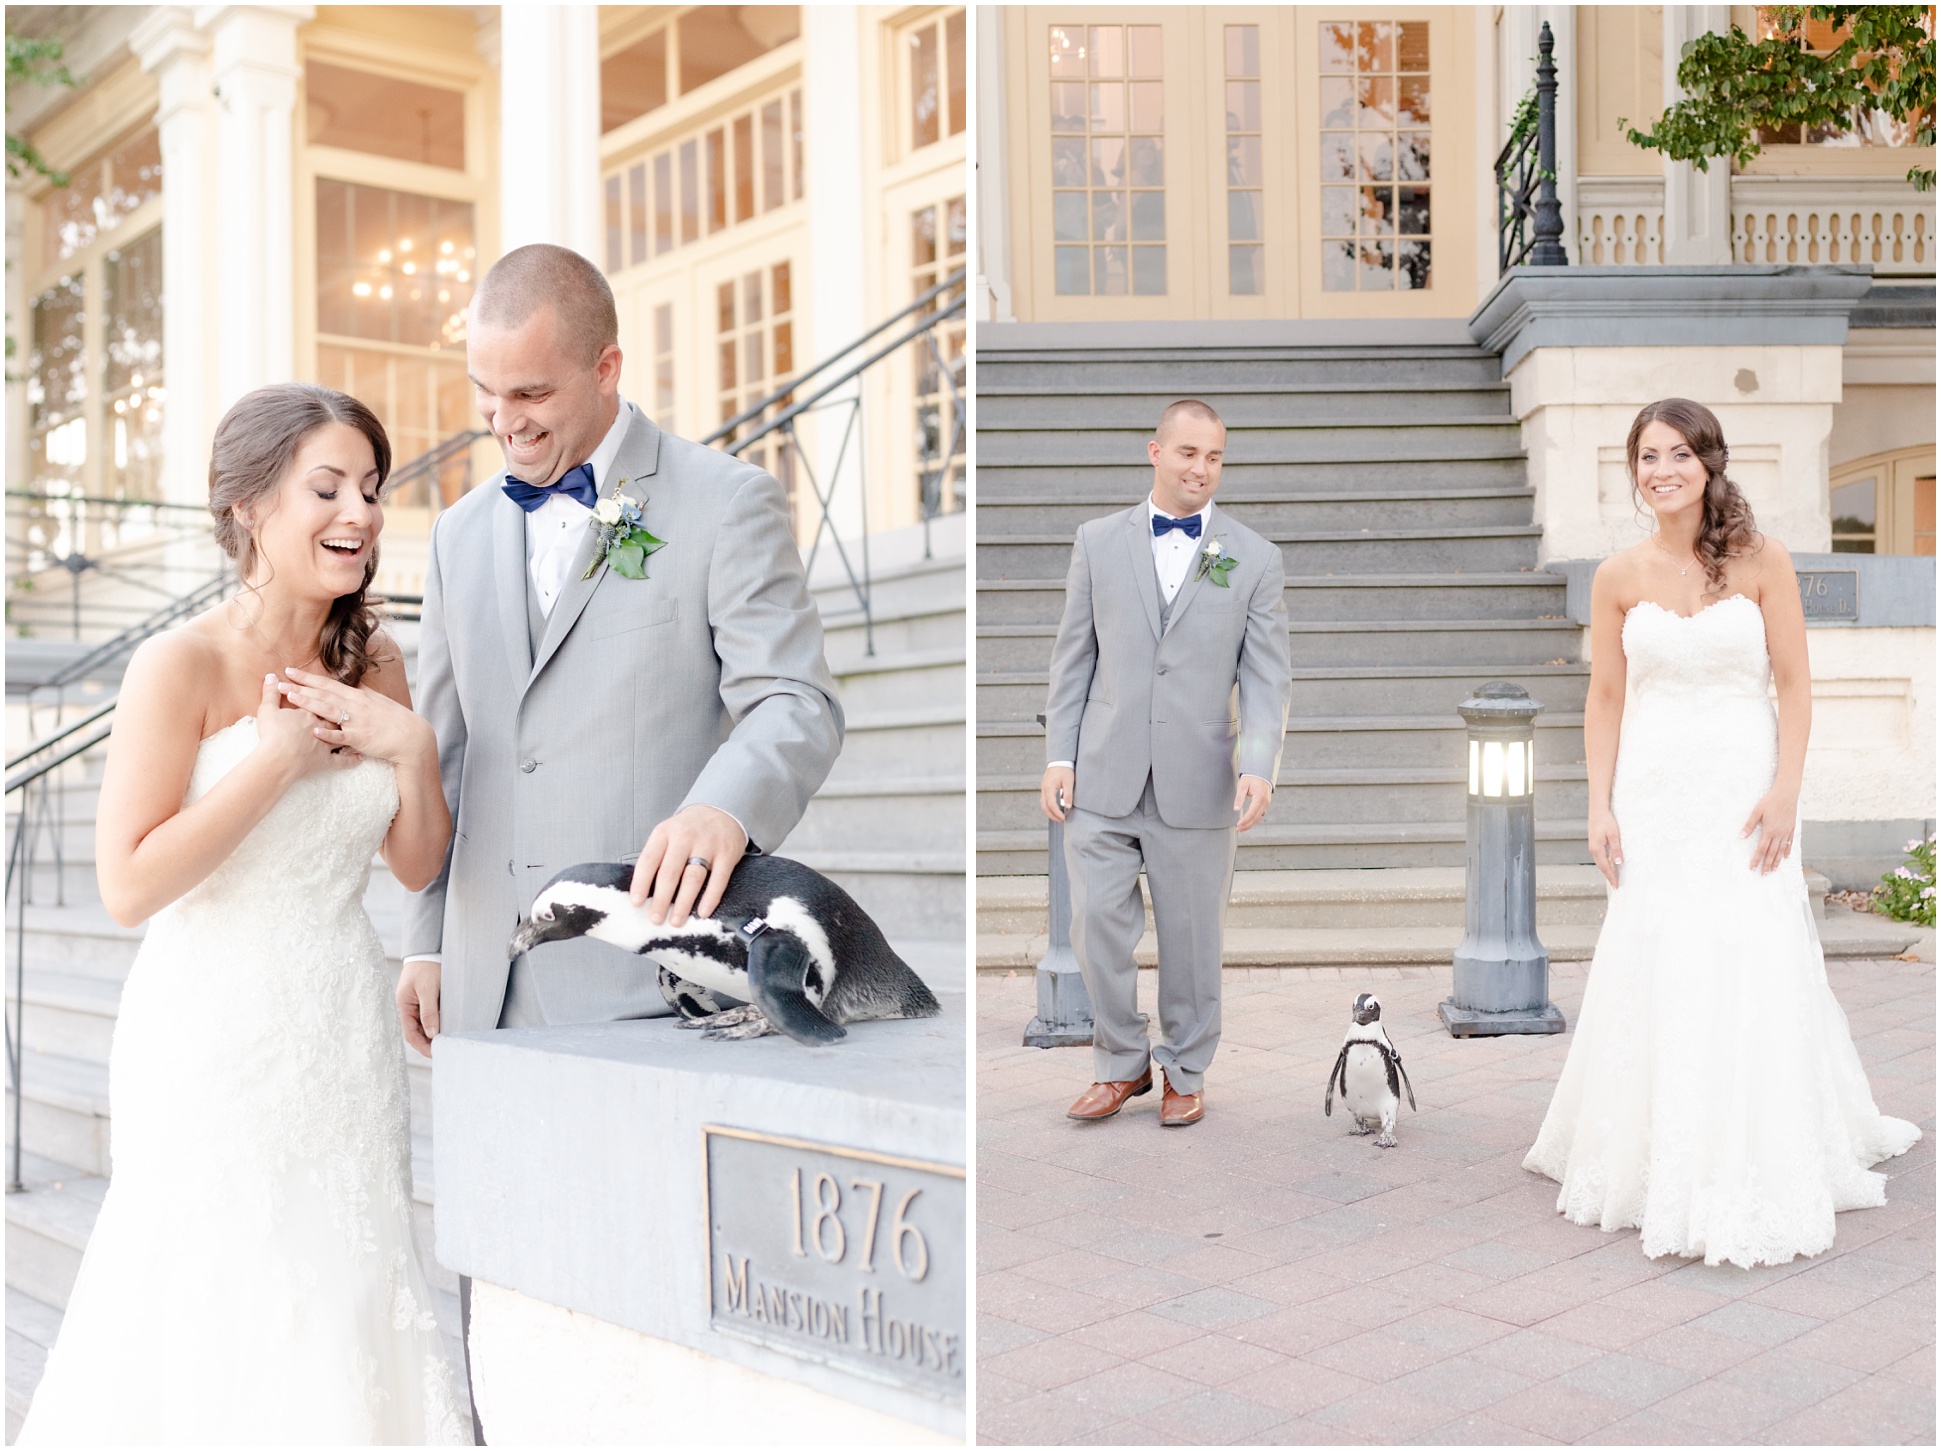 Bride and groom petting penguin and laughing; bride and groom walking with penguin